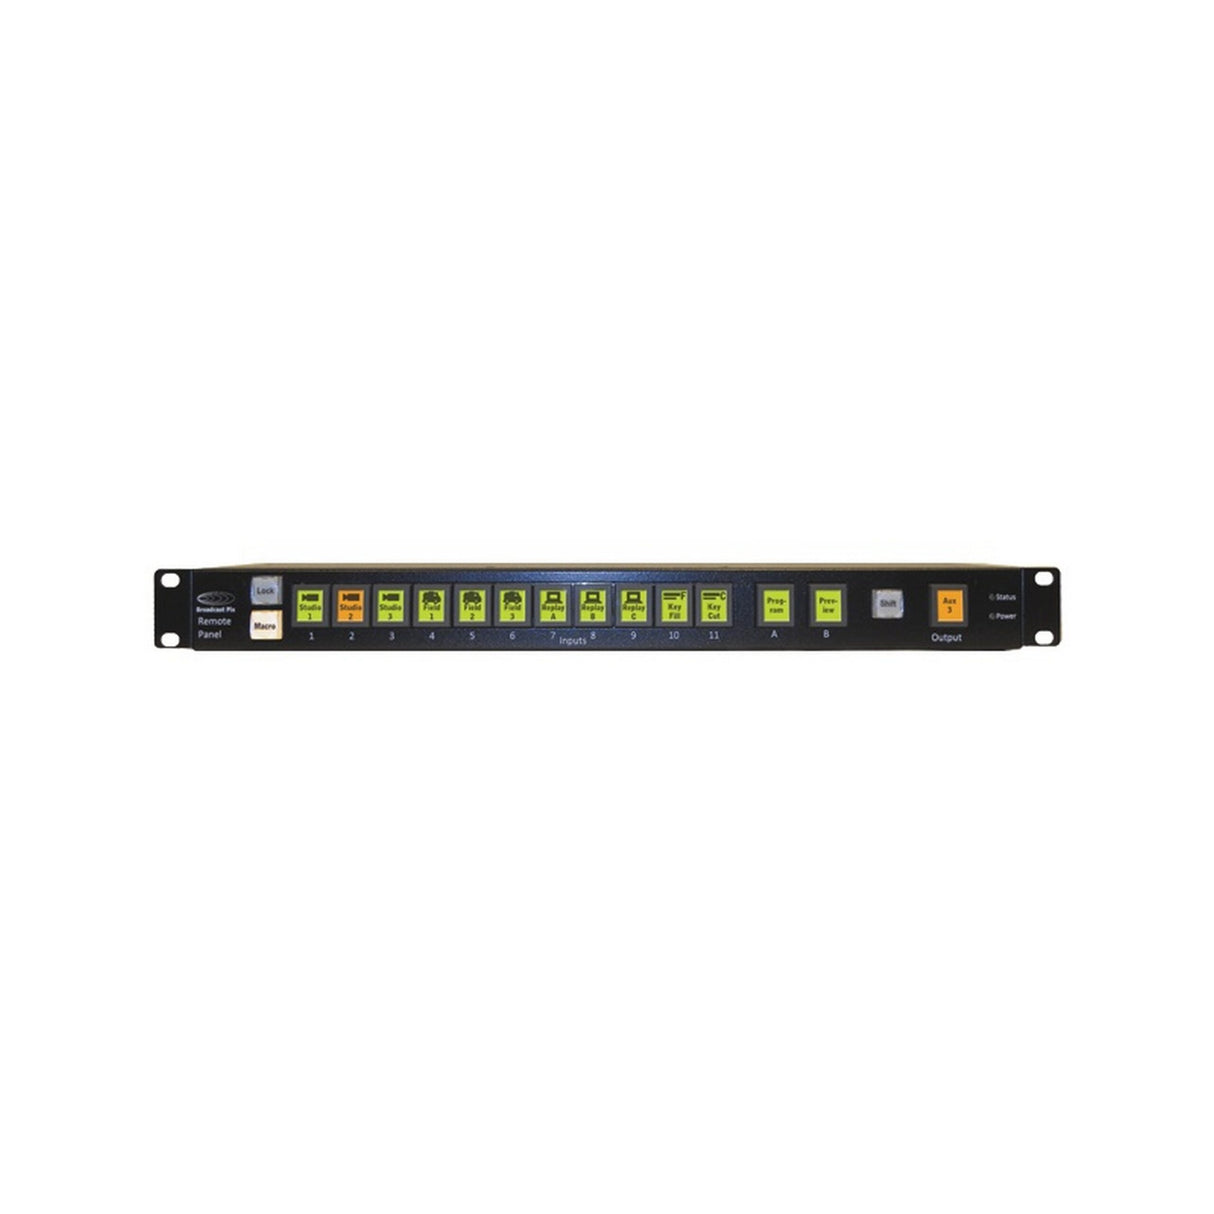 Broadcast Pix Remote Panel for Controlling Outputs and Macros, 1 RU